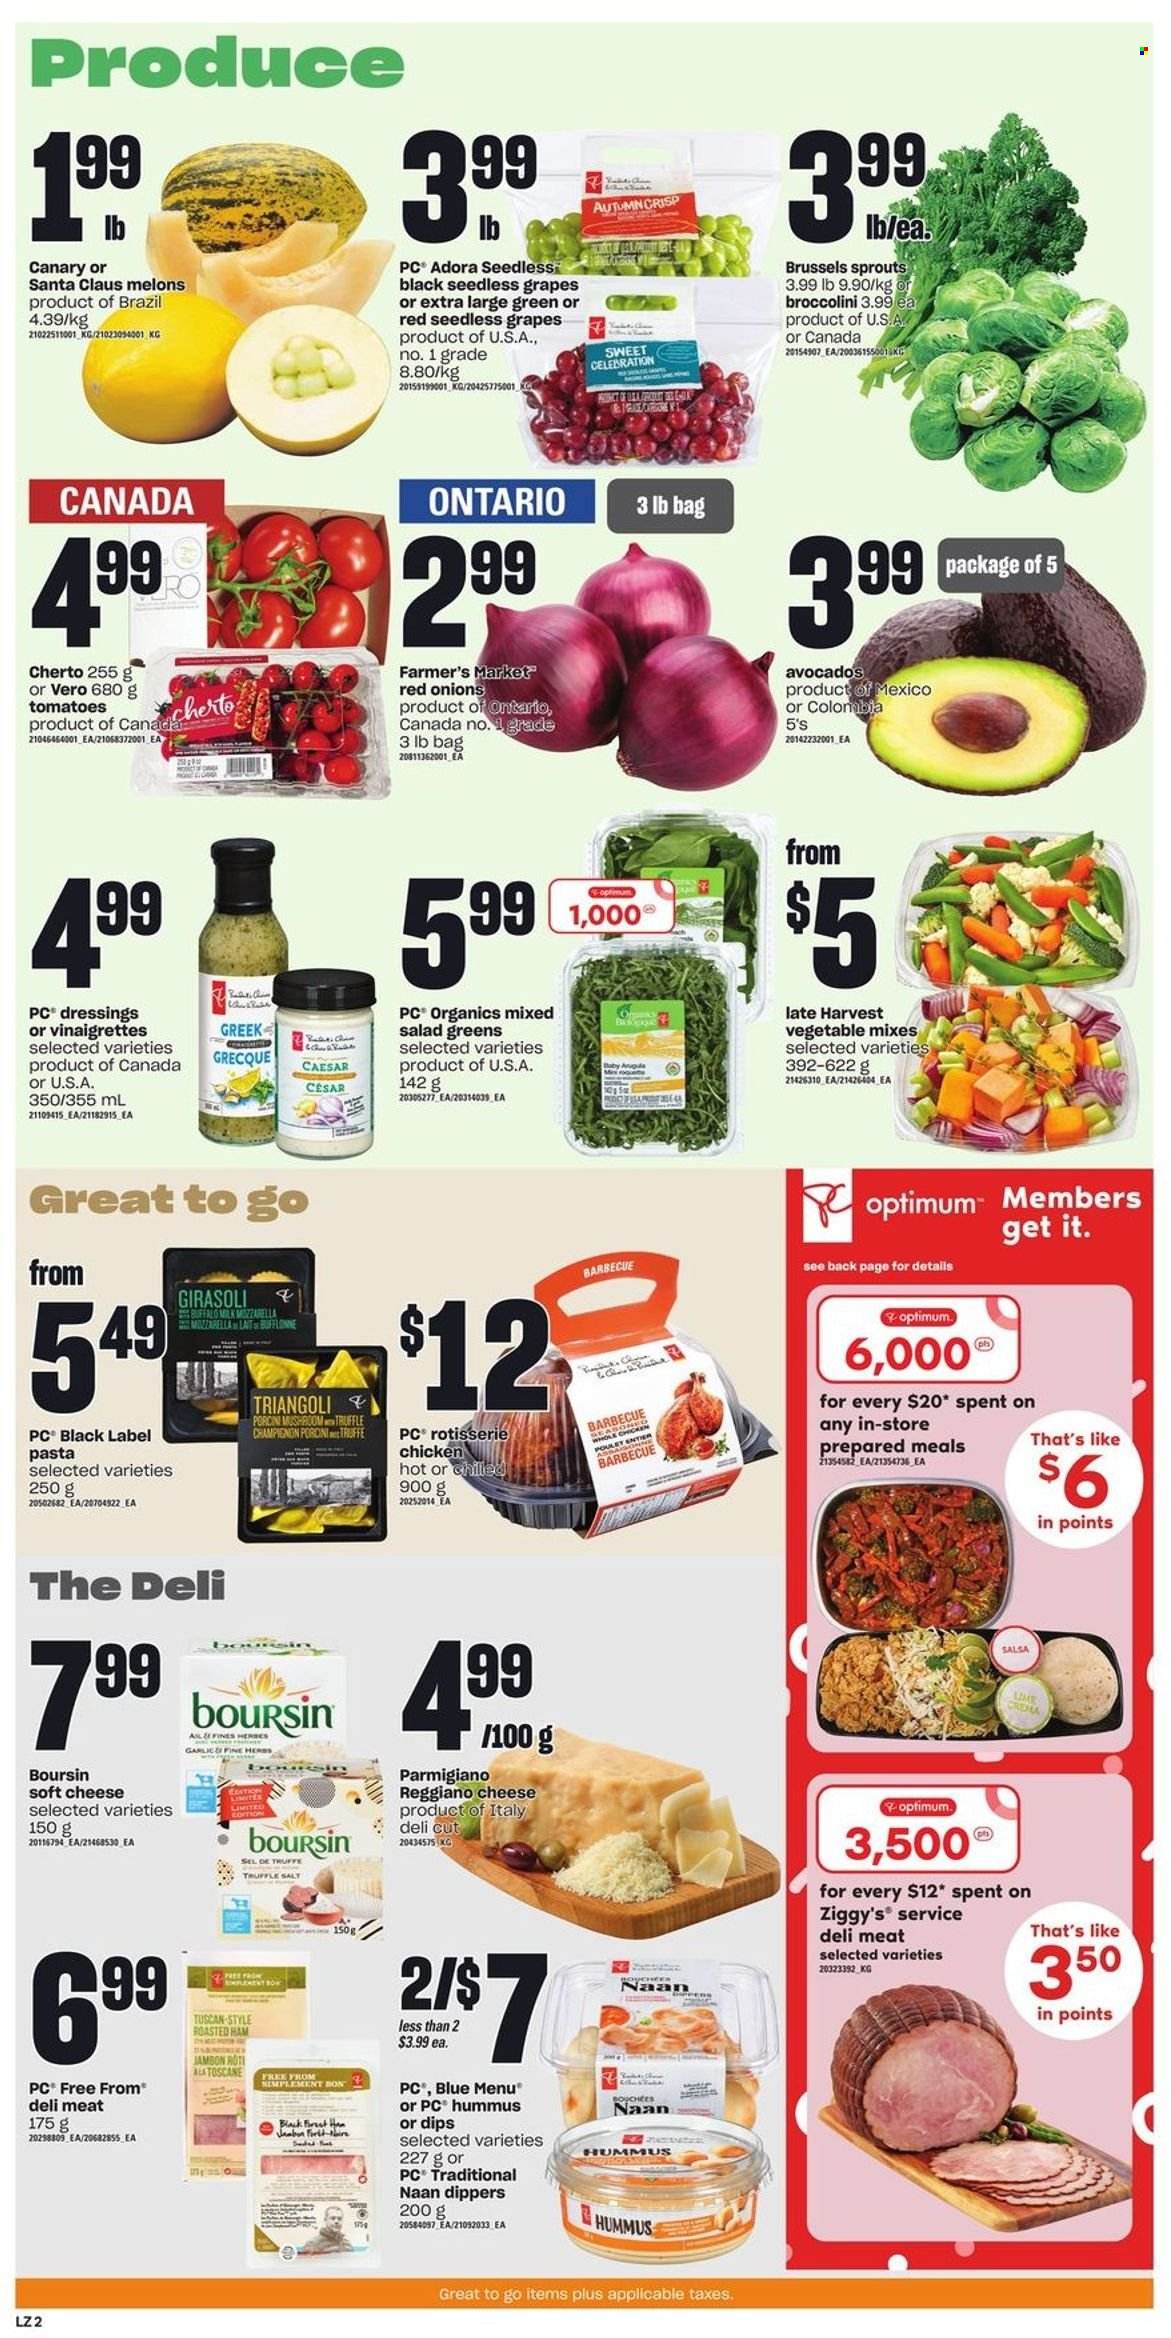 thumbnail - Loblaws Flyer - December 01, 2022 - December 07, 2022 - Sales products - mushrooms, red onions, tomatoes, onion, brussel sprouts, broccolini, avocado, grapes, seedless grapes, melons, chicken roast, pasta, ham, hummus, soft cheese, cheese, Parmigiano Reggiano, milk, truffles, Celebration, Santa, salsa, Optimum, mozzarella, salad greens. Page 3.